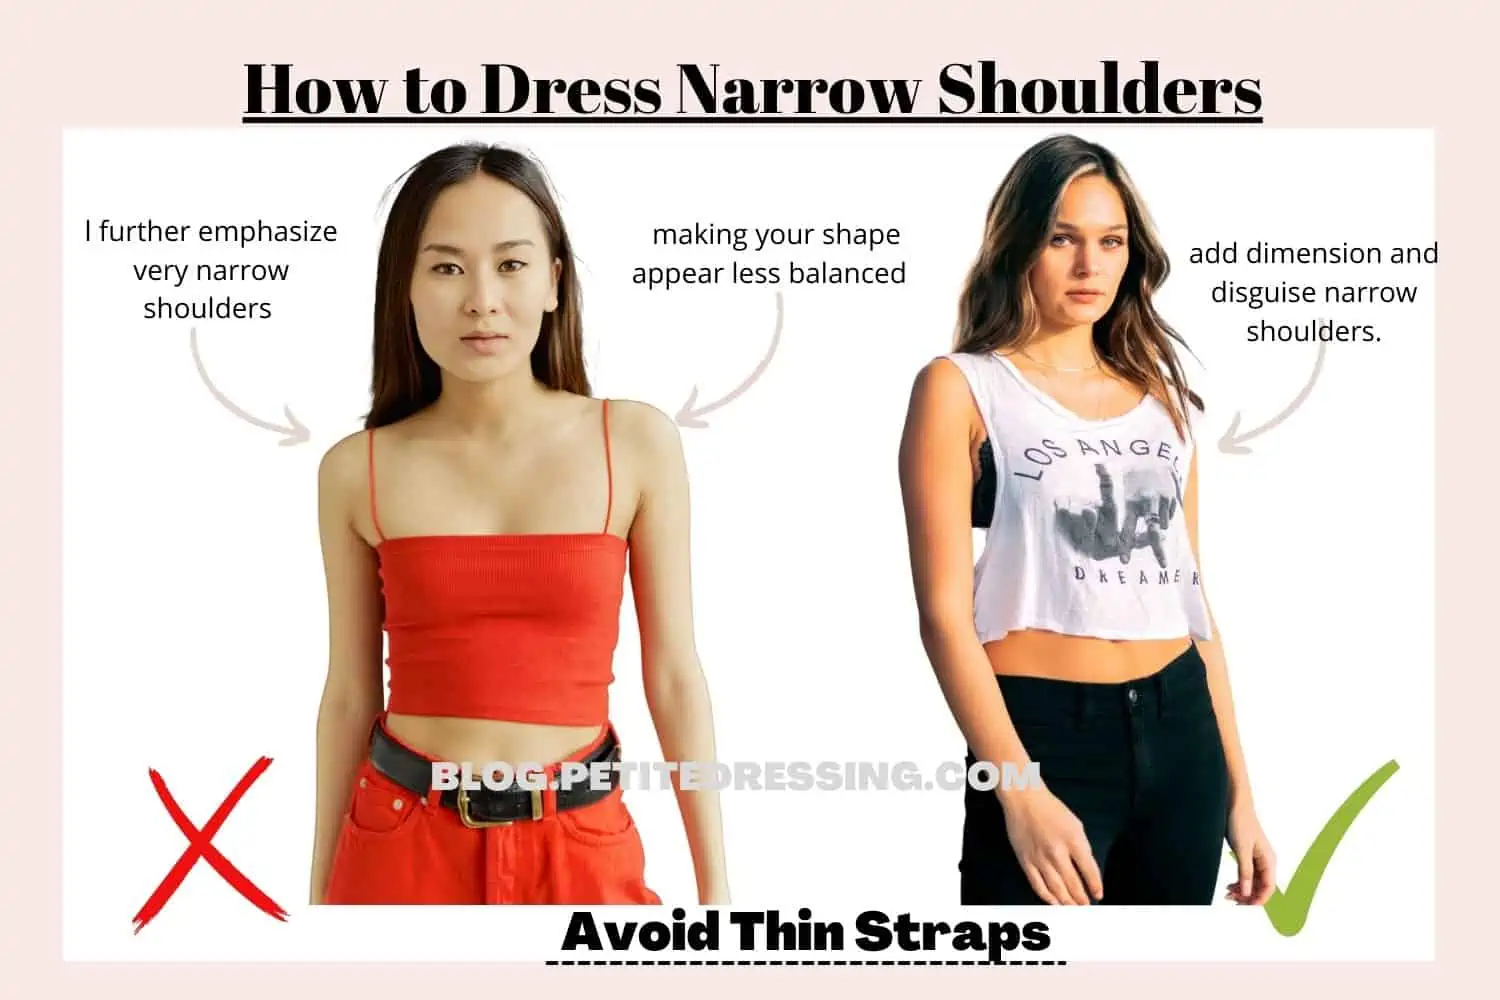 Narrow Shoulders? What's To Do To Make Them Look More Defined?